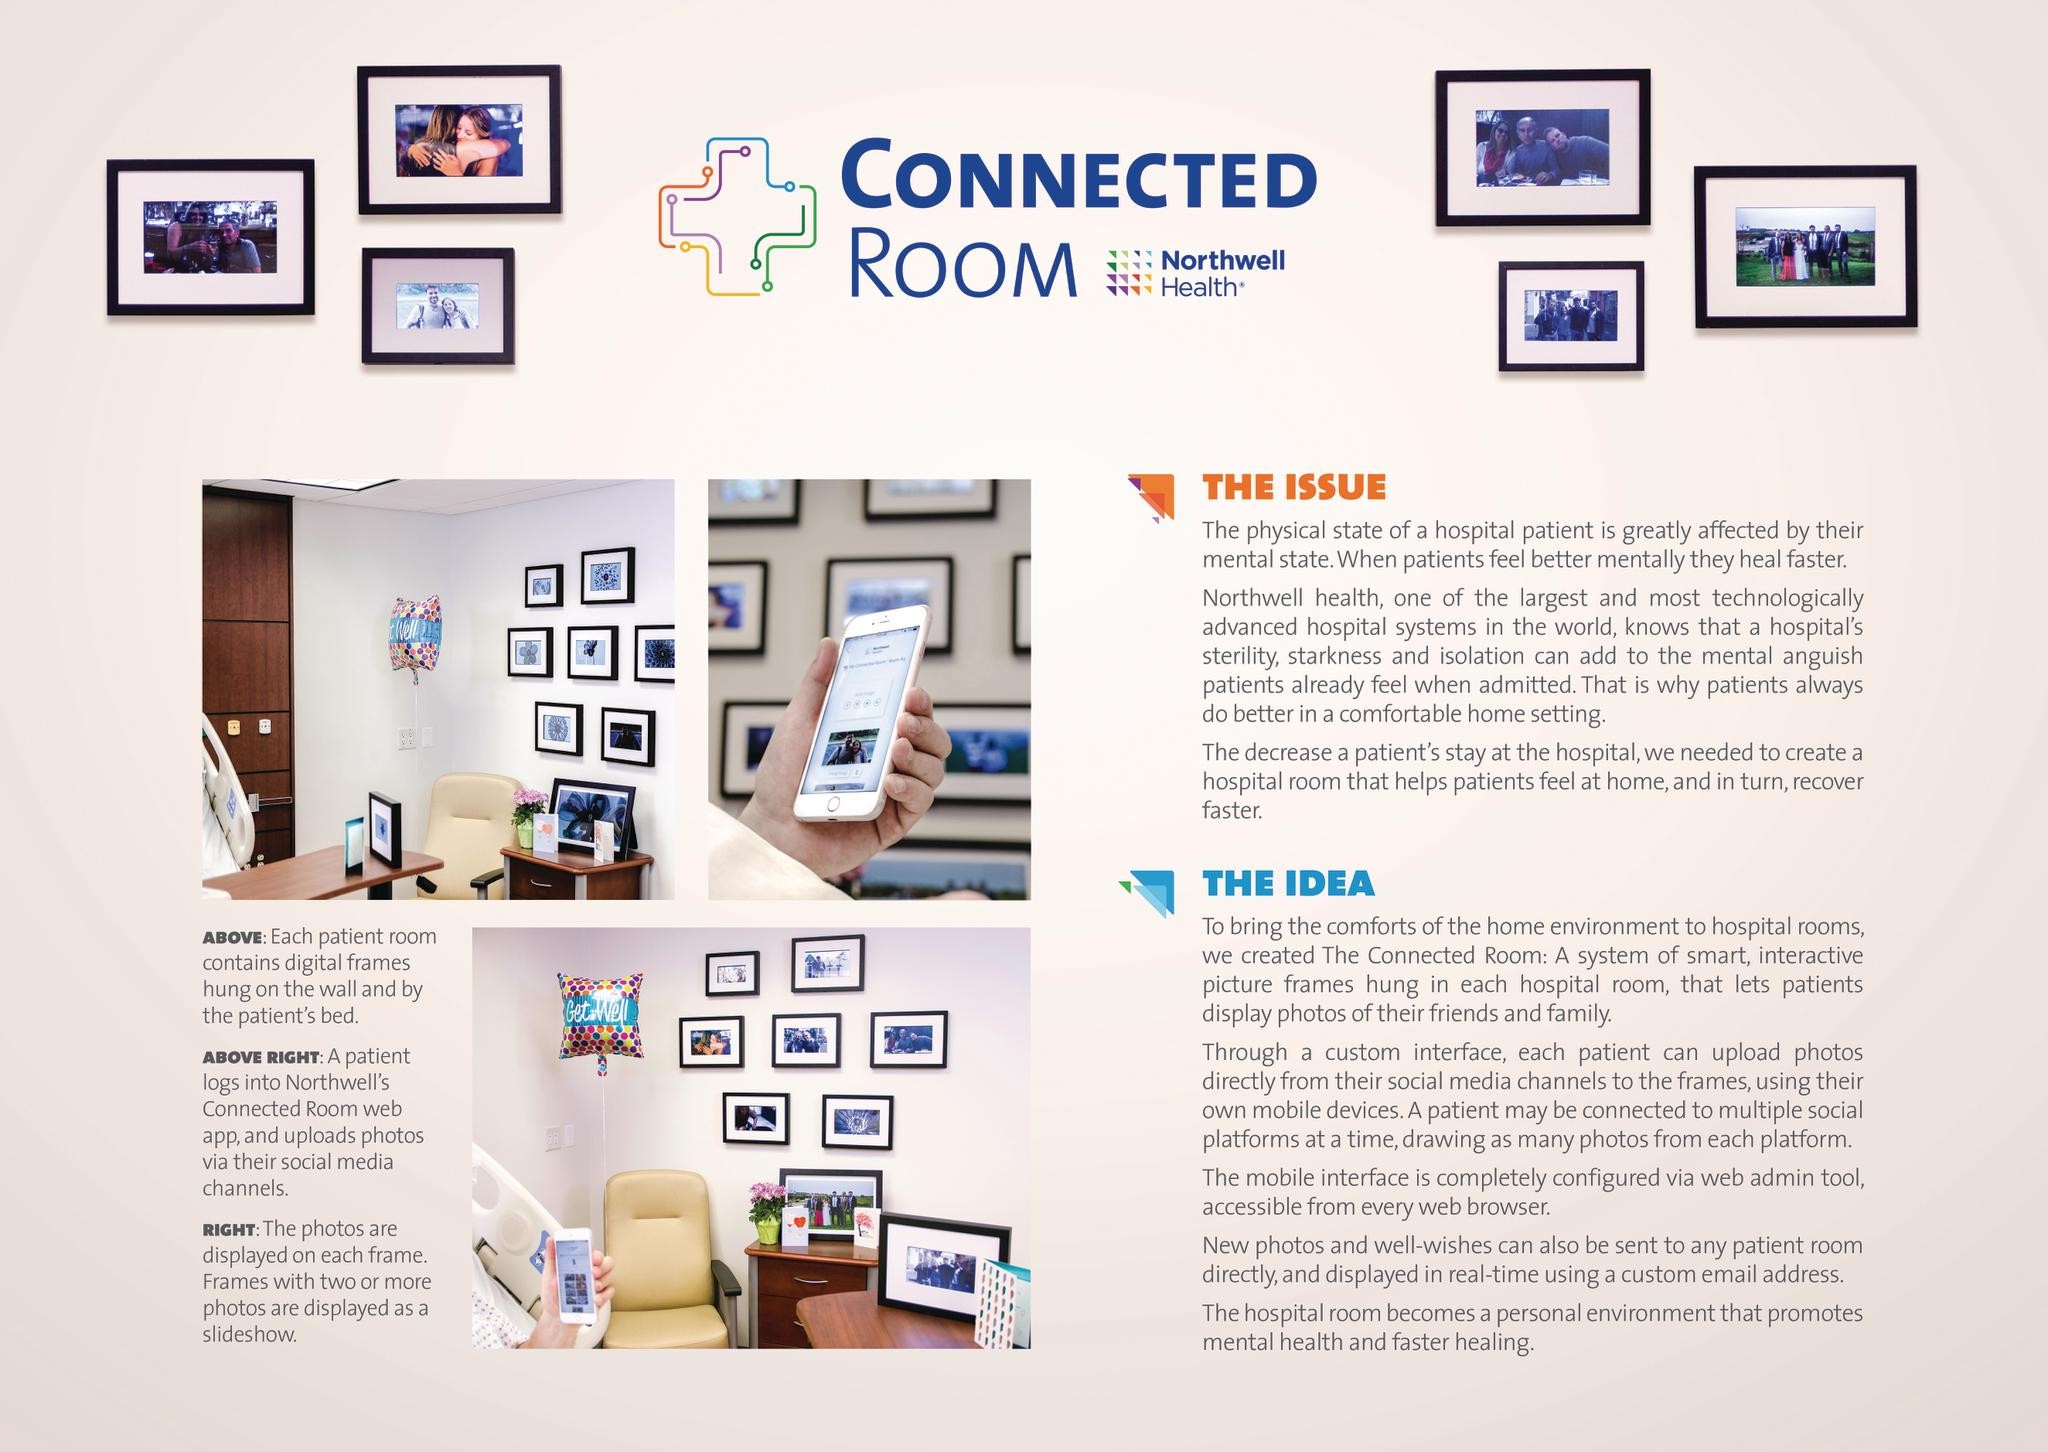 CONNECTED ROOM